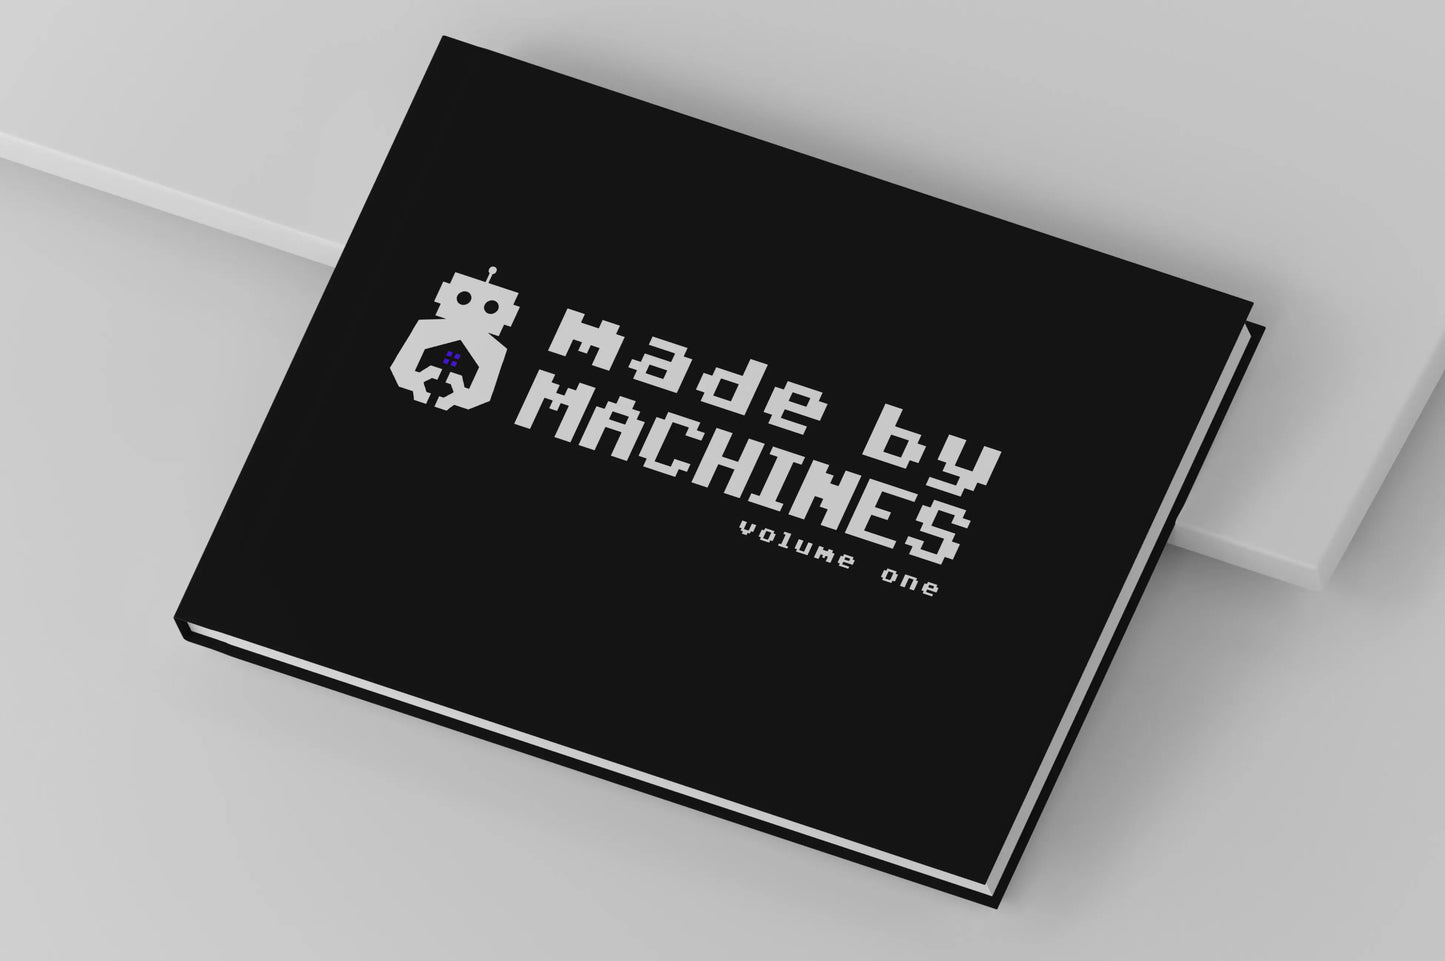 MADE BY MACHINES - VOLUME ONE - PROMPTED BY xDx